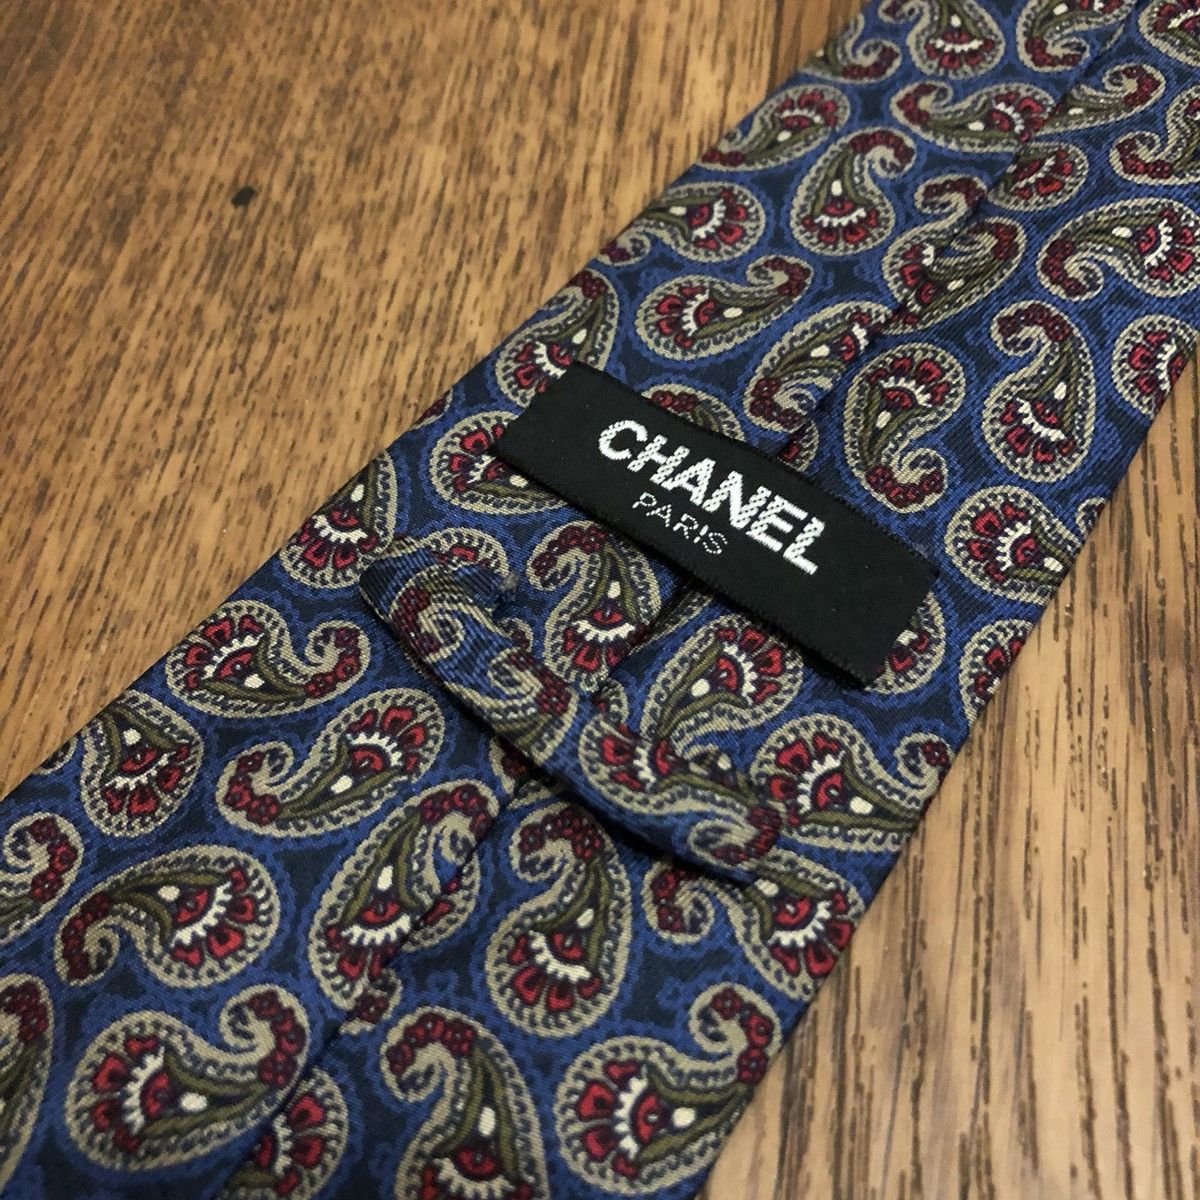 Chanel Chanel Very Rare Vintage 90s Silk Tie Logo Size ONE SIZE - 1 Preview